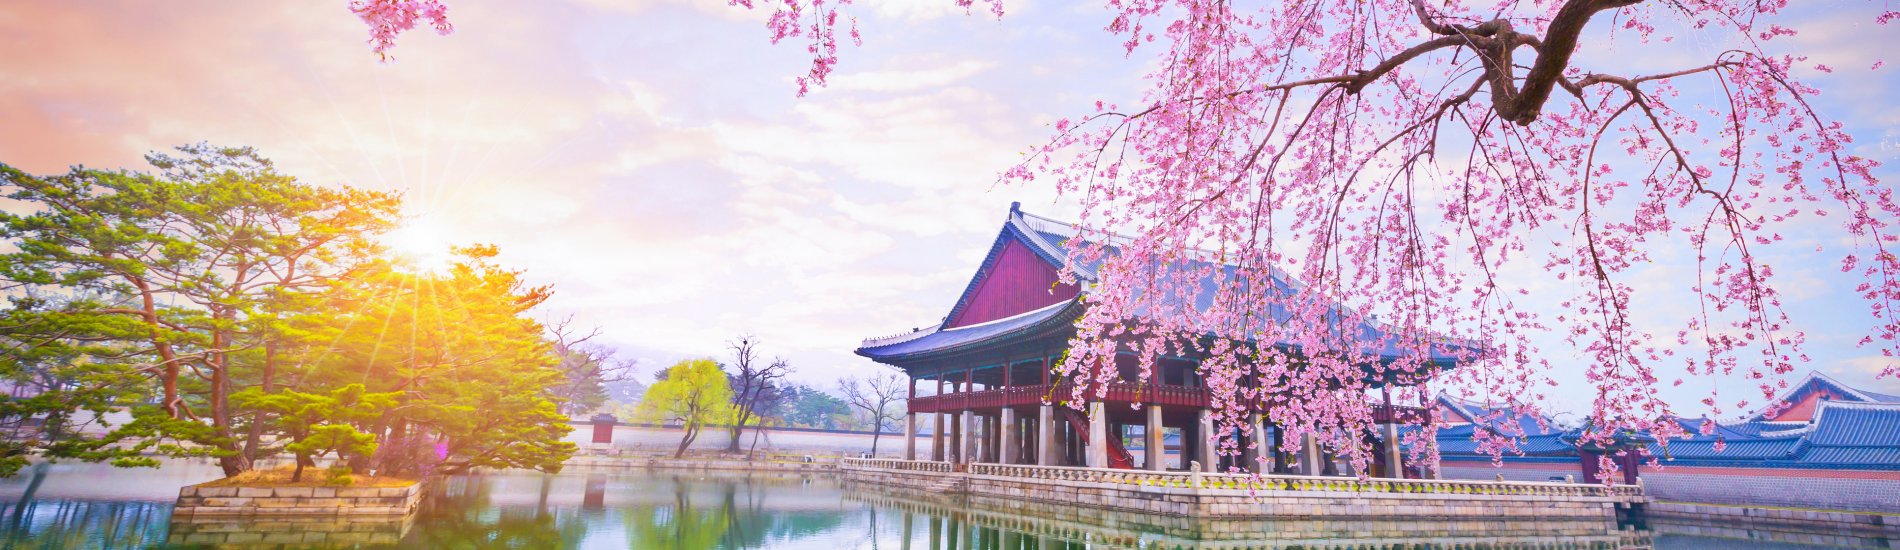 Gyeongbokgung palace with cherry blossom tree in spring time in Seoul, South Korea